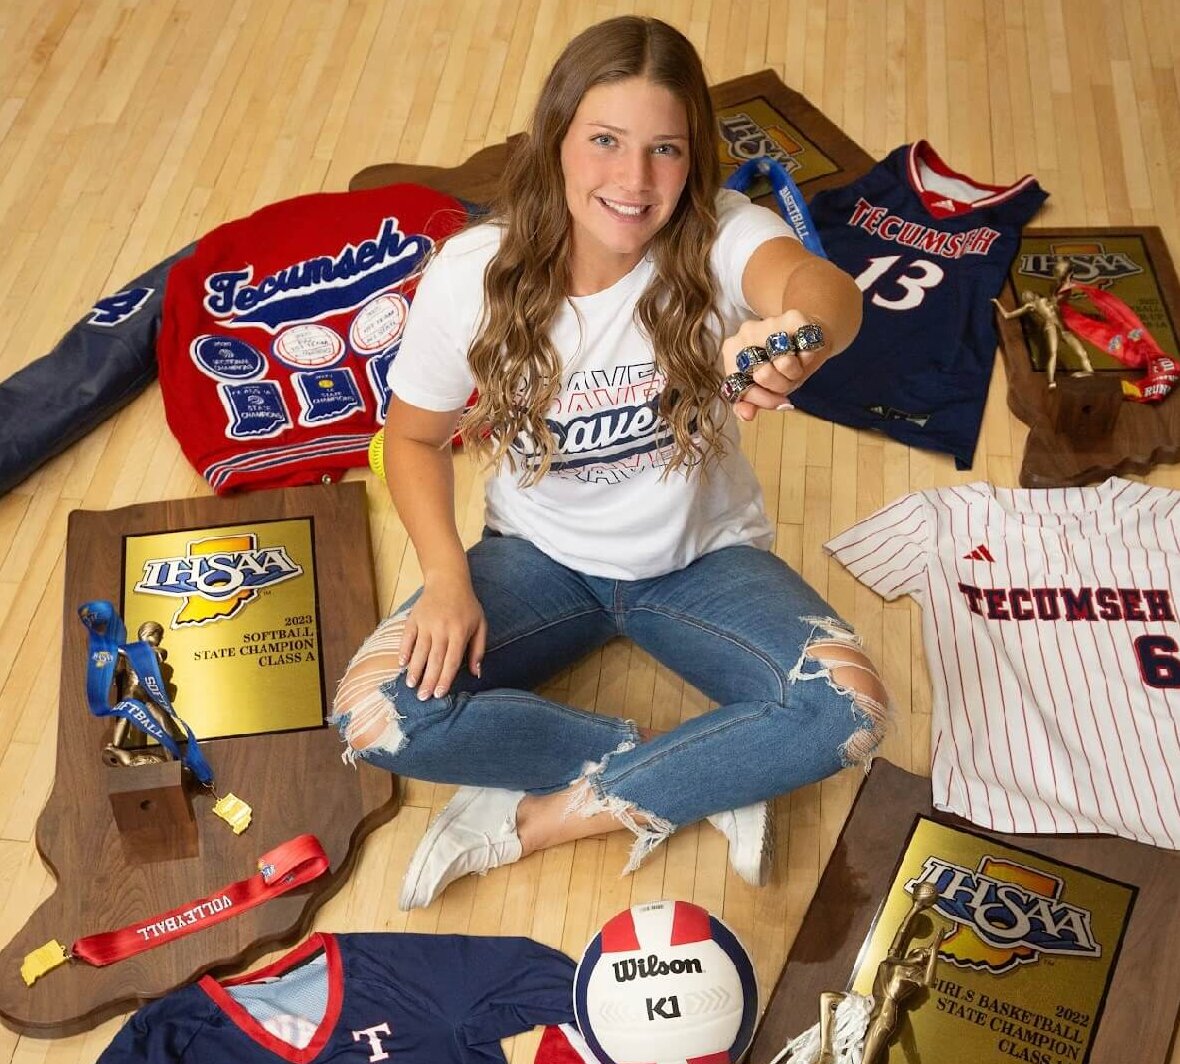 Player Profile: Jenna Donohoo, A Multi-Sport Athlete Stacked with Several State Titles, Finds Future at Evansville